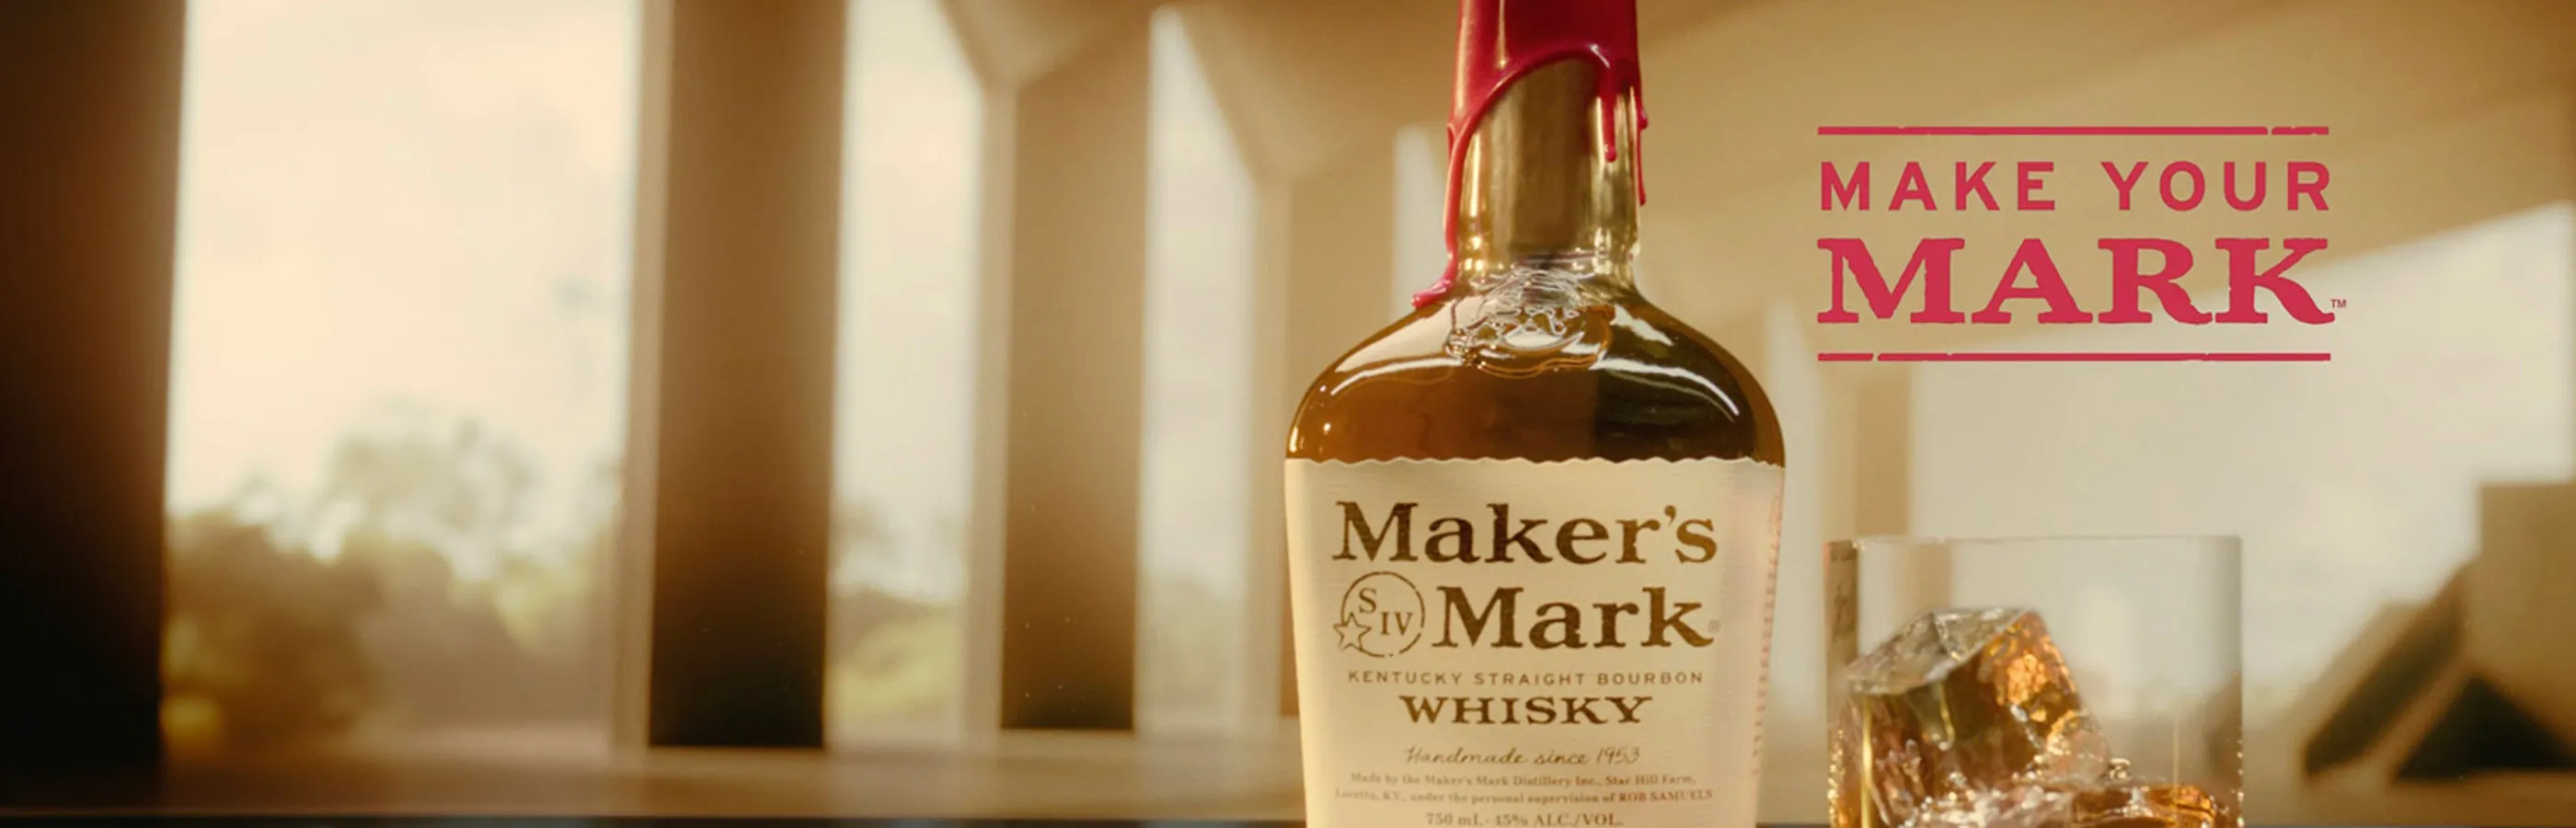 Maker’s Mark® Launches New Global Campaign: “Make Your Mark”